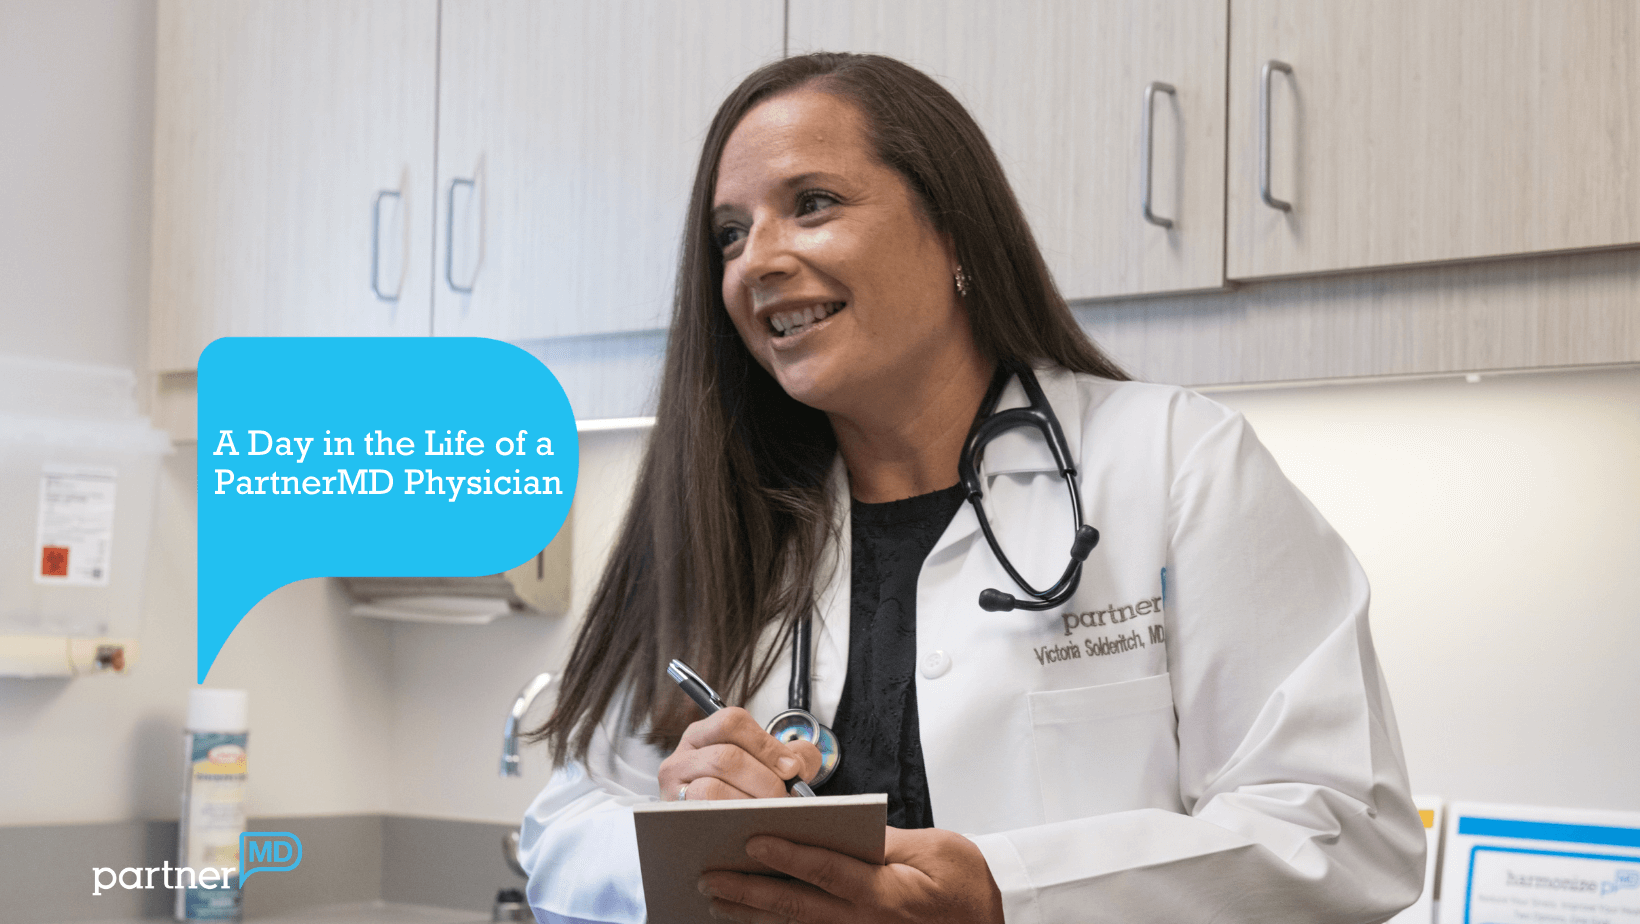 Concierge Medicine Jobs: A Day in the Life of a PartnerMD Physician